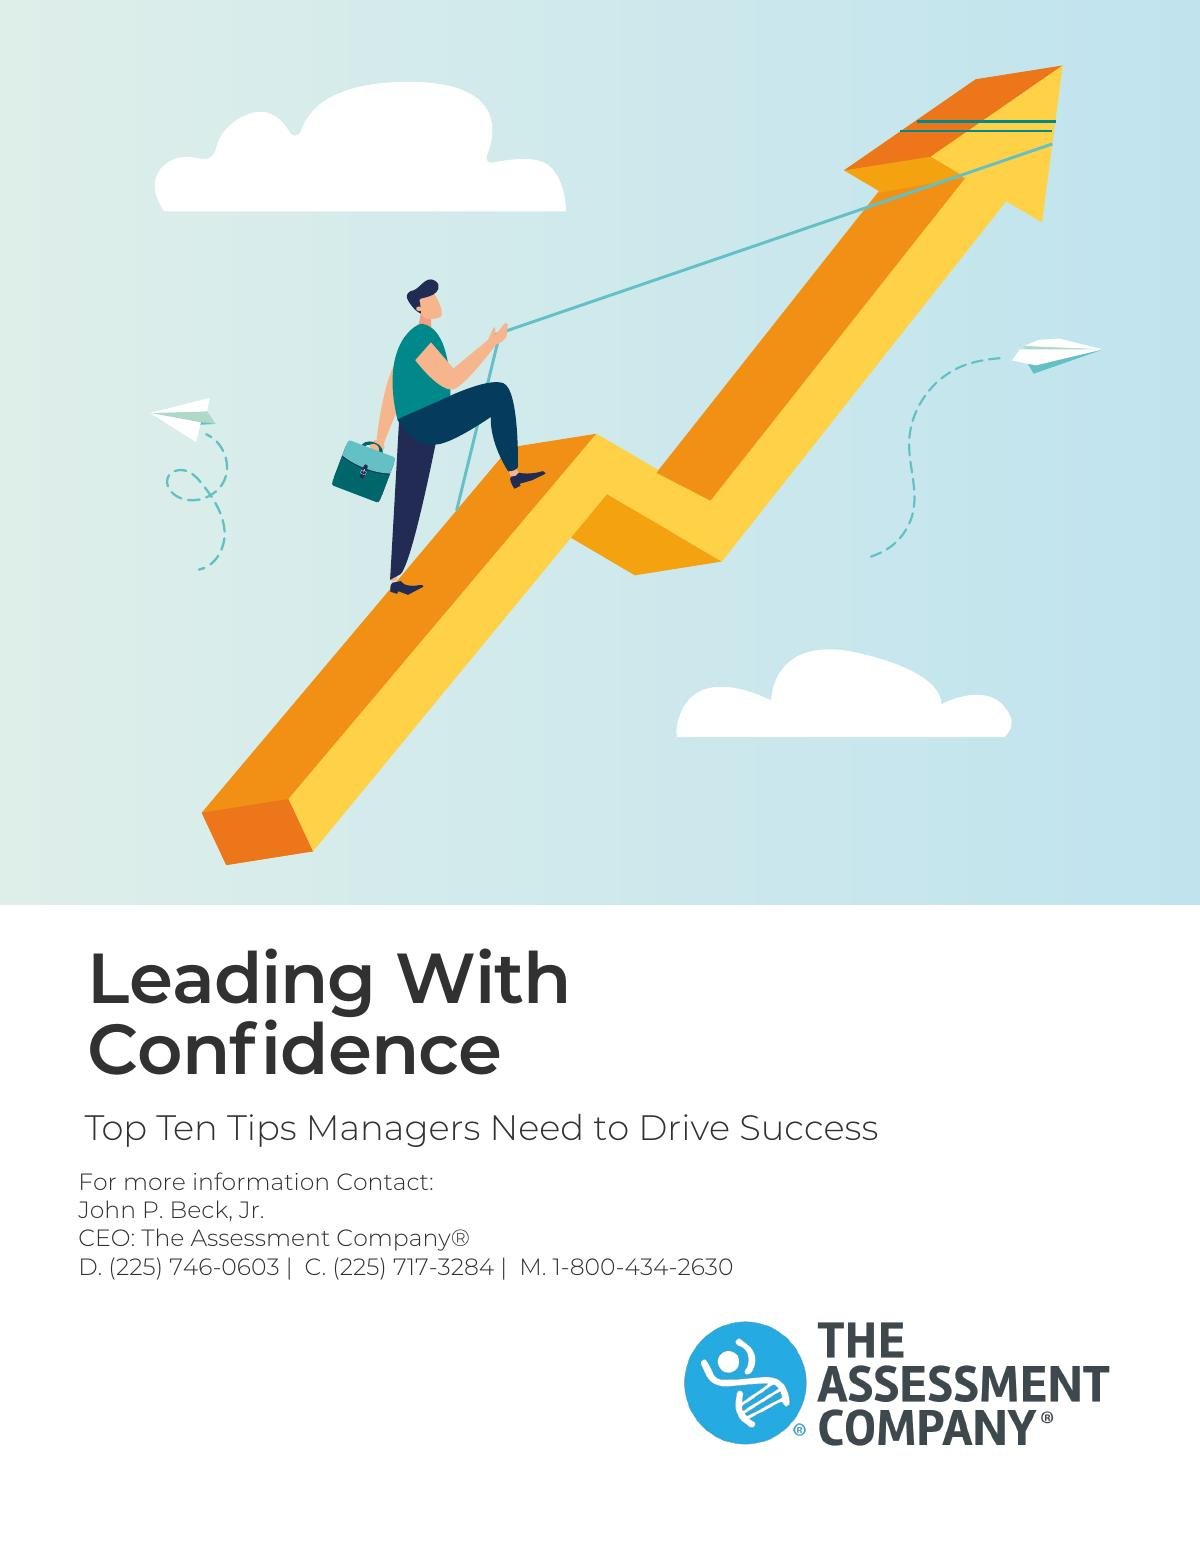 Leading With Confidence: Top Ten Tips Managers Need to Drive Success